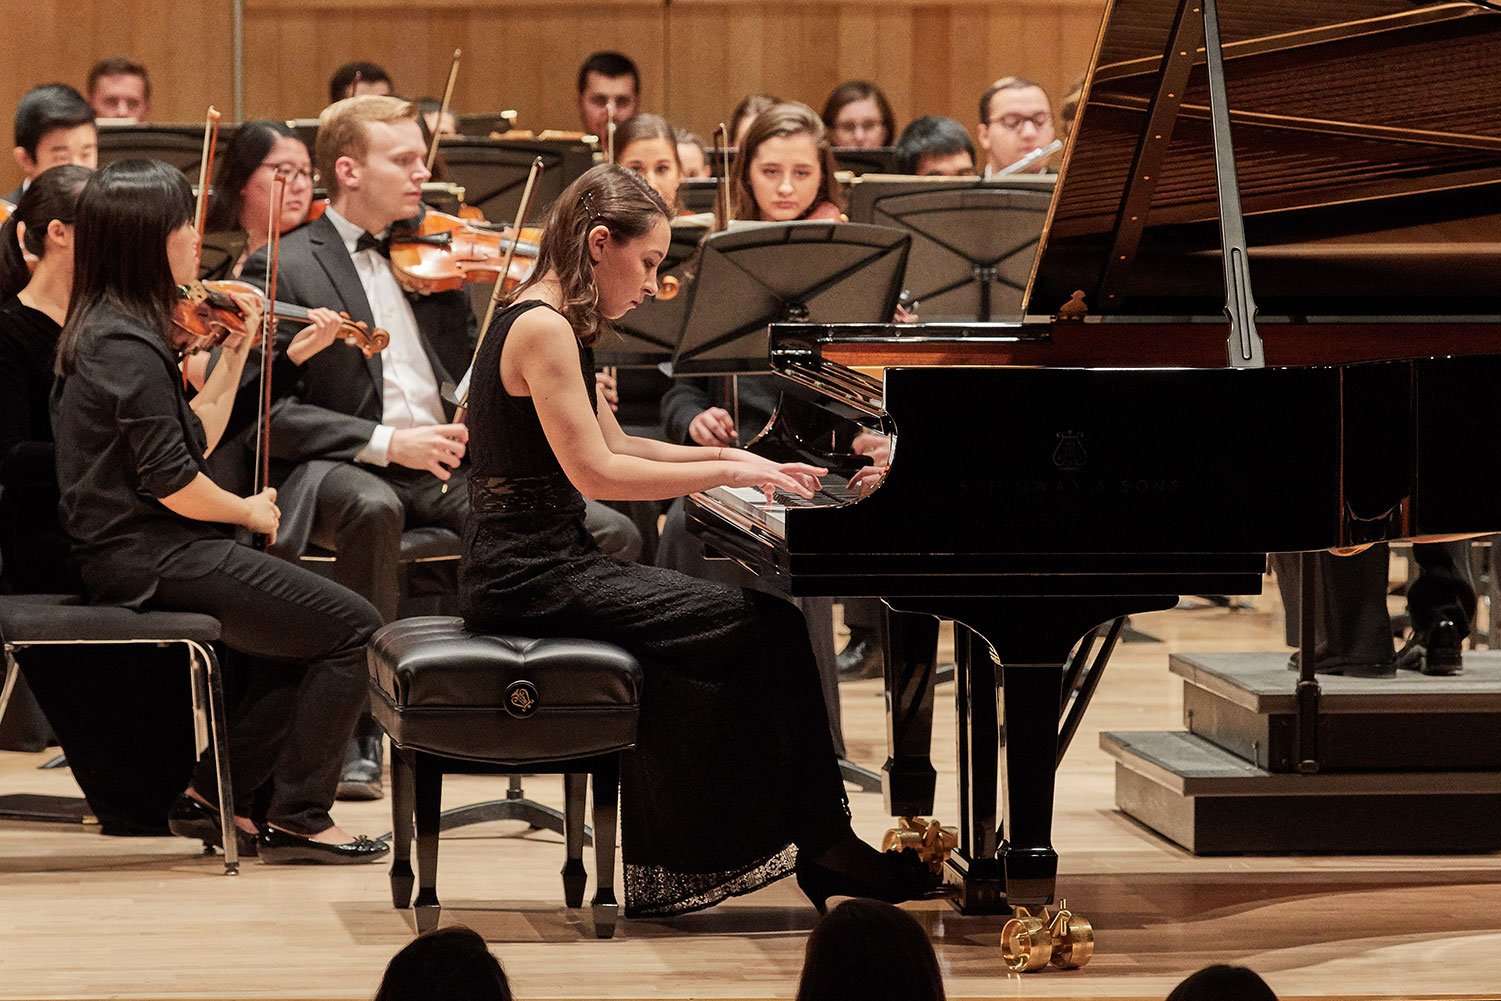 Olga Radovic, a graduate student, plays the inaugural performance on the university's new Steinway model D concert grand piano while performing with the UConn Symphony Orchestra at von der Mehden Recital Hall on Dec. 7, 2017.